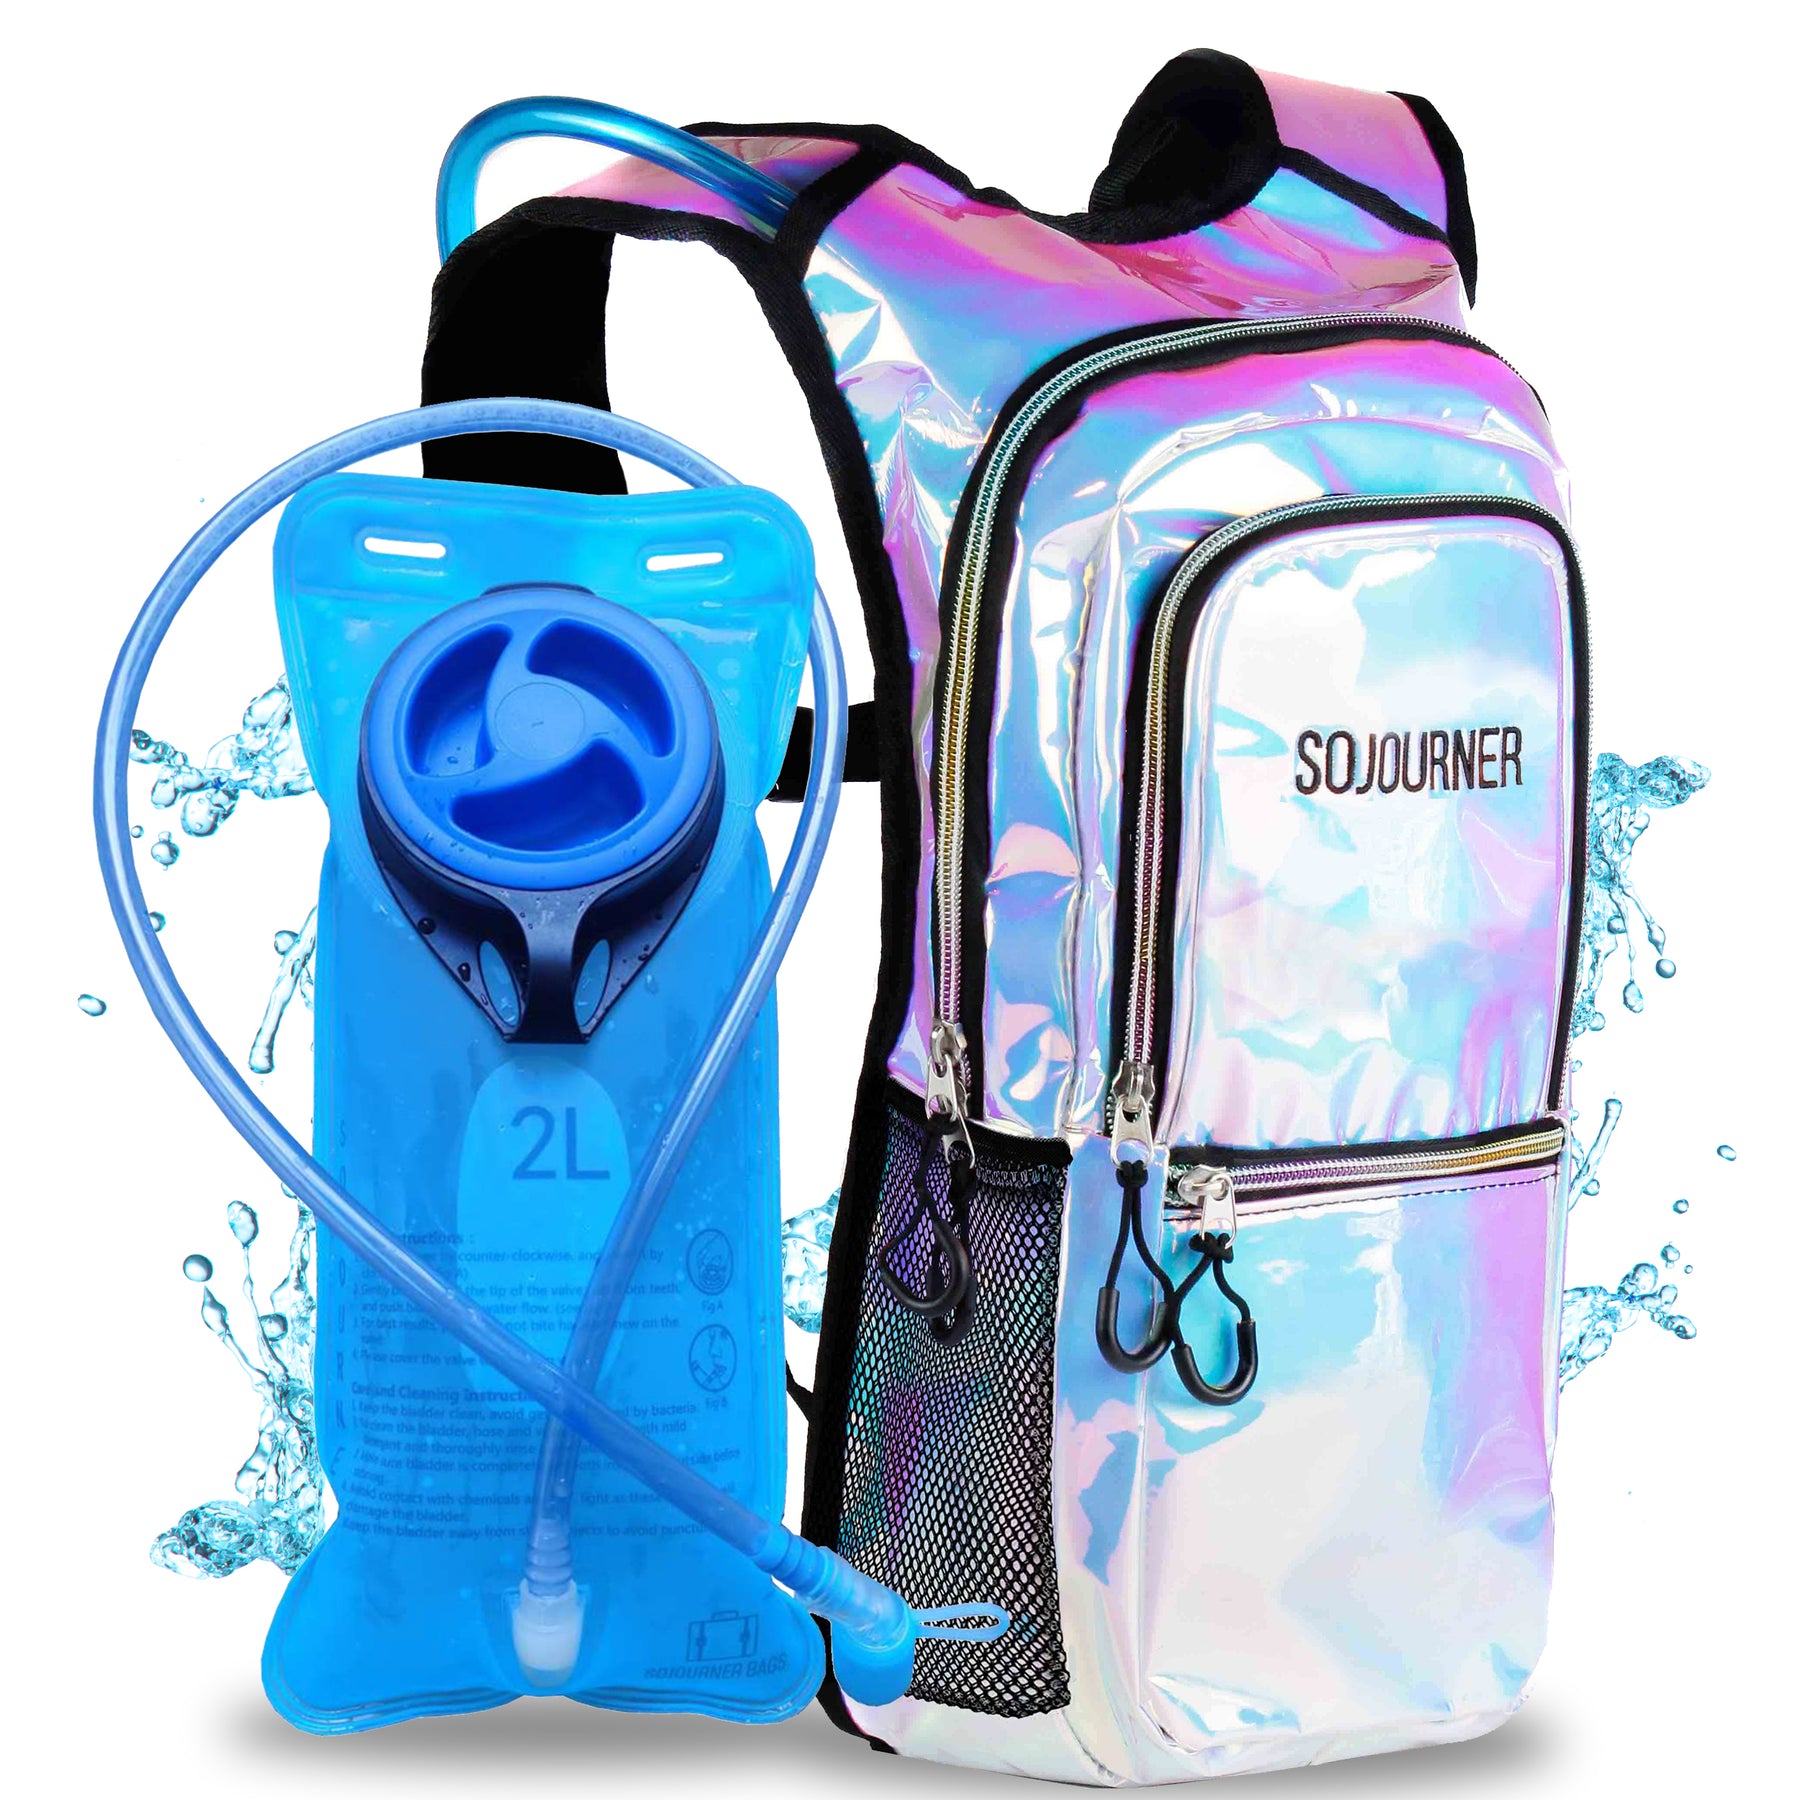 Medium Hydration Pack Backpack - 2L Water Bladder - Holographic Blue